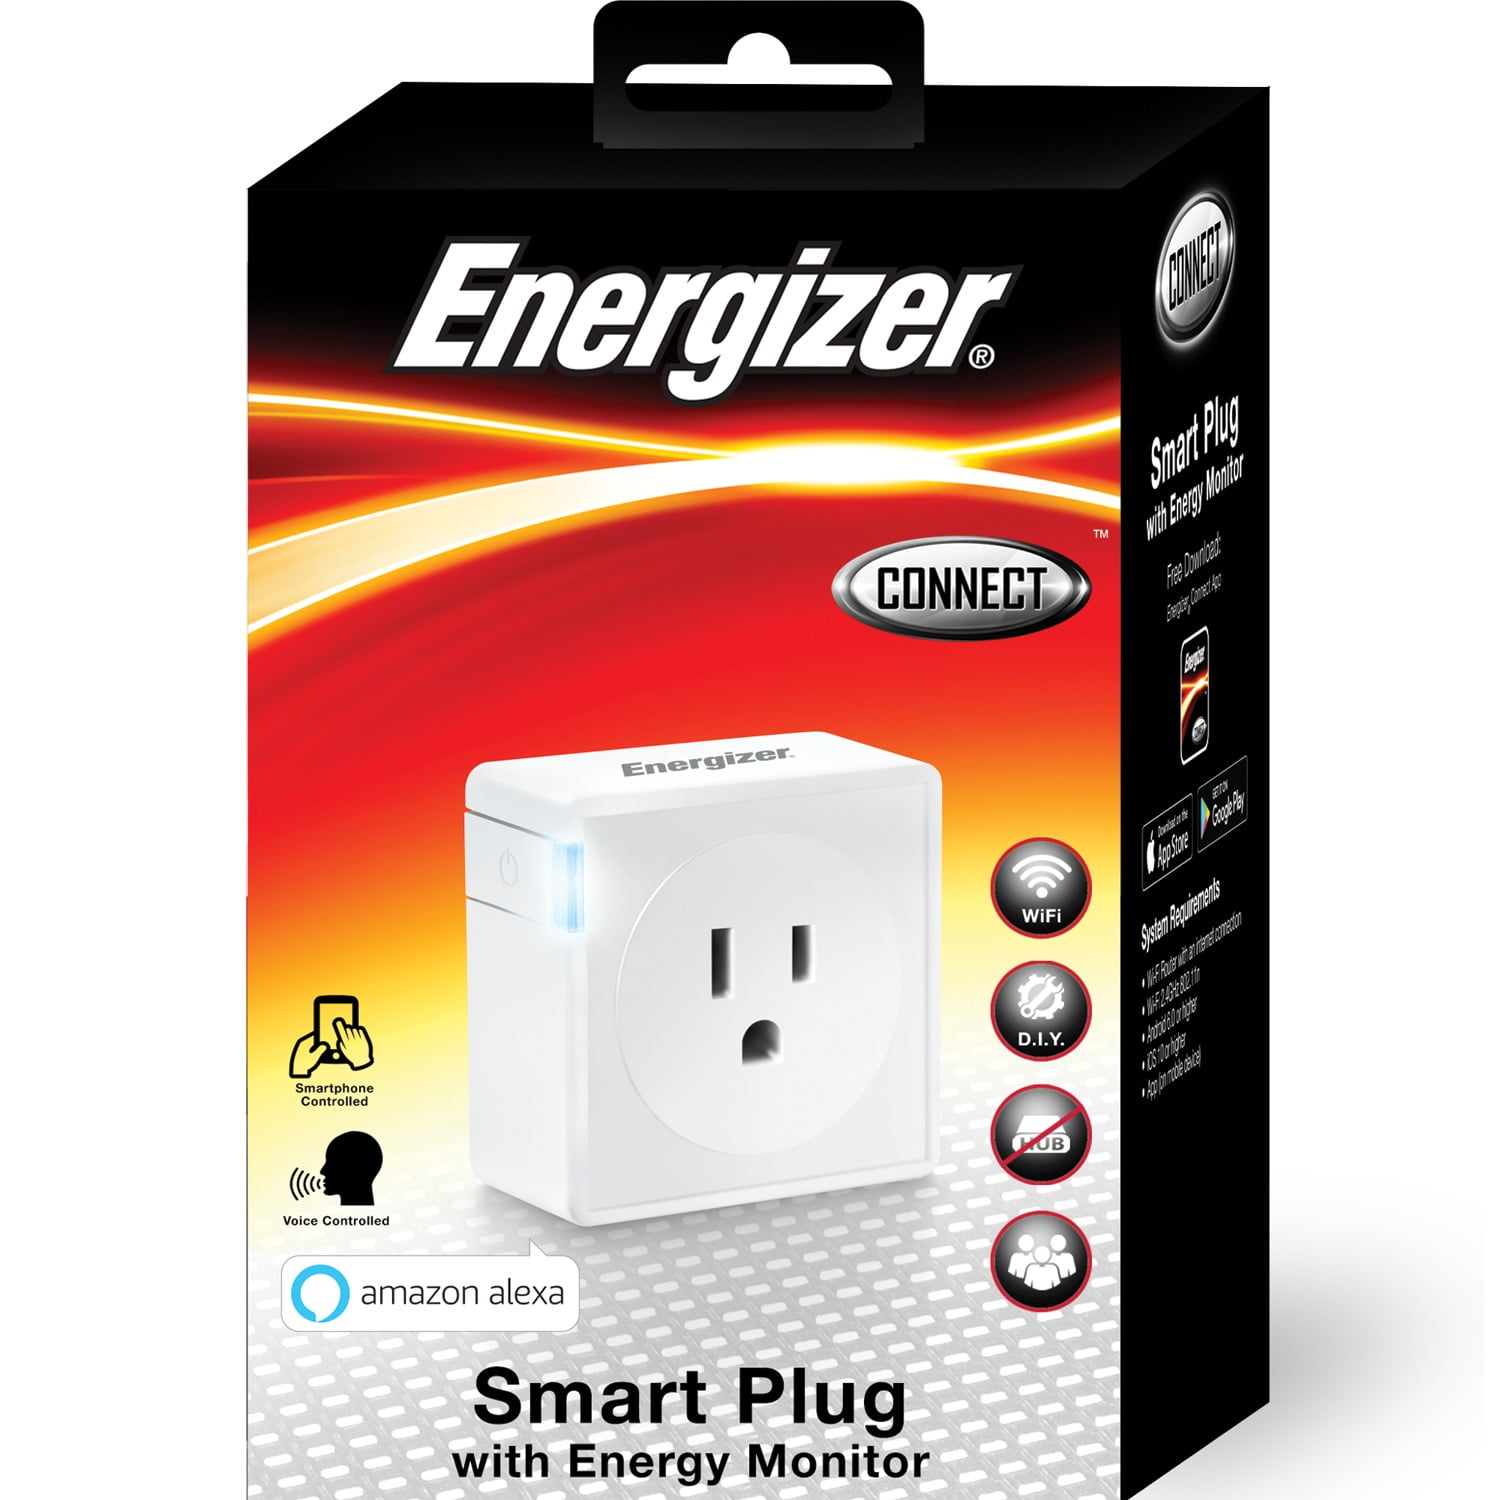 Energizer Connect Eix3-1003-pp4 15-Amp Smart Wi-Fi Plugs (4 Pack)